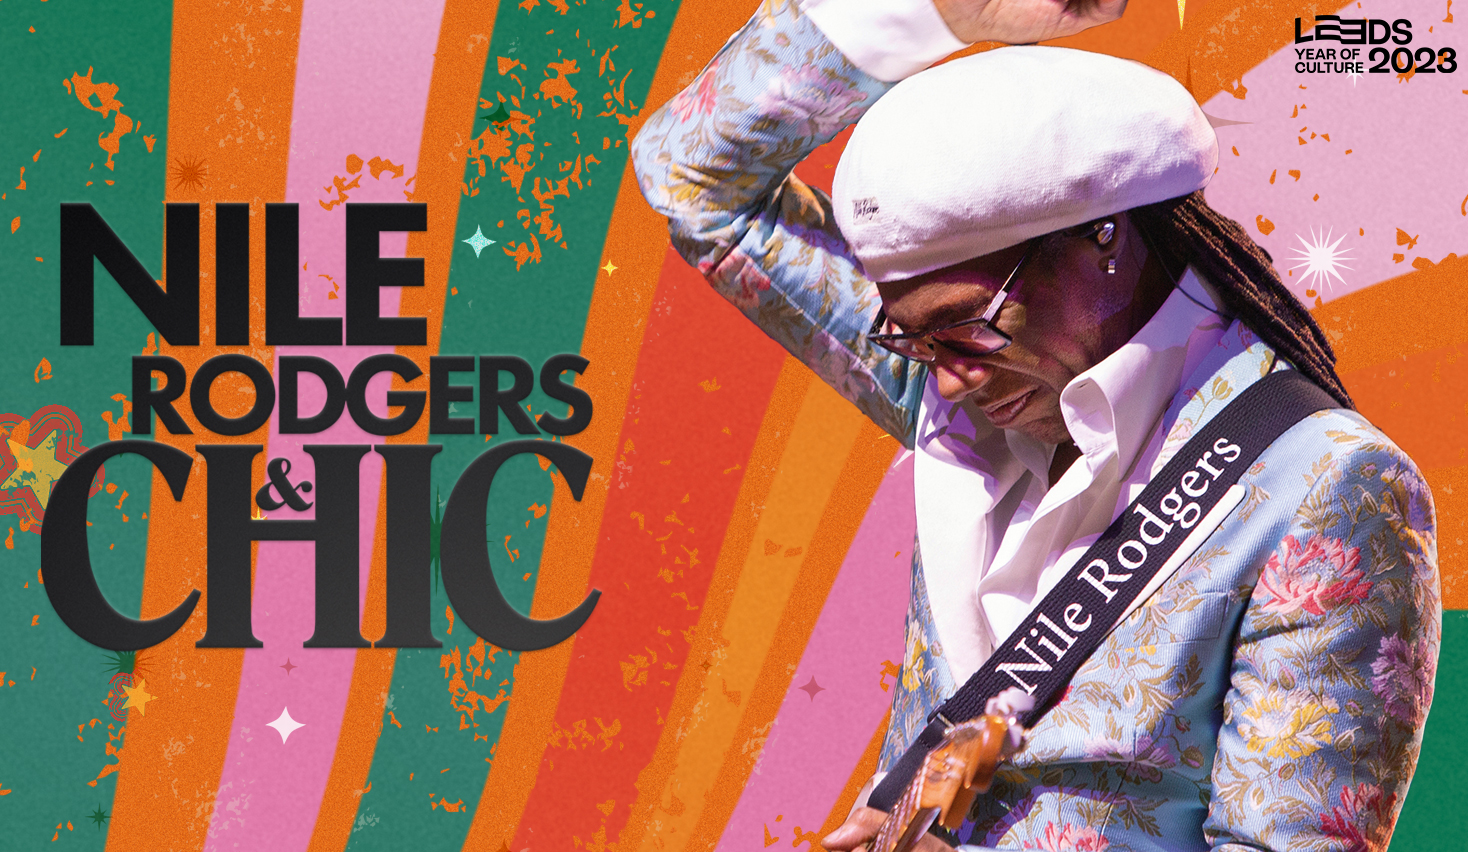 Nile Rodgers feat CHIC